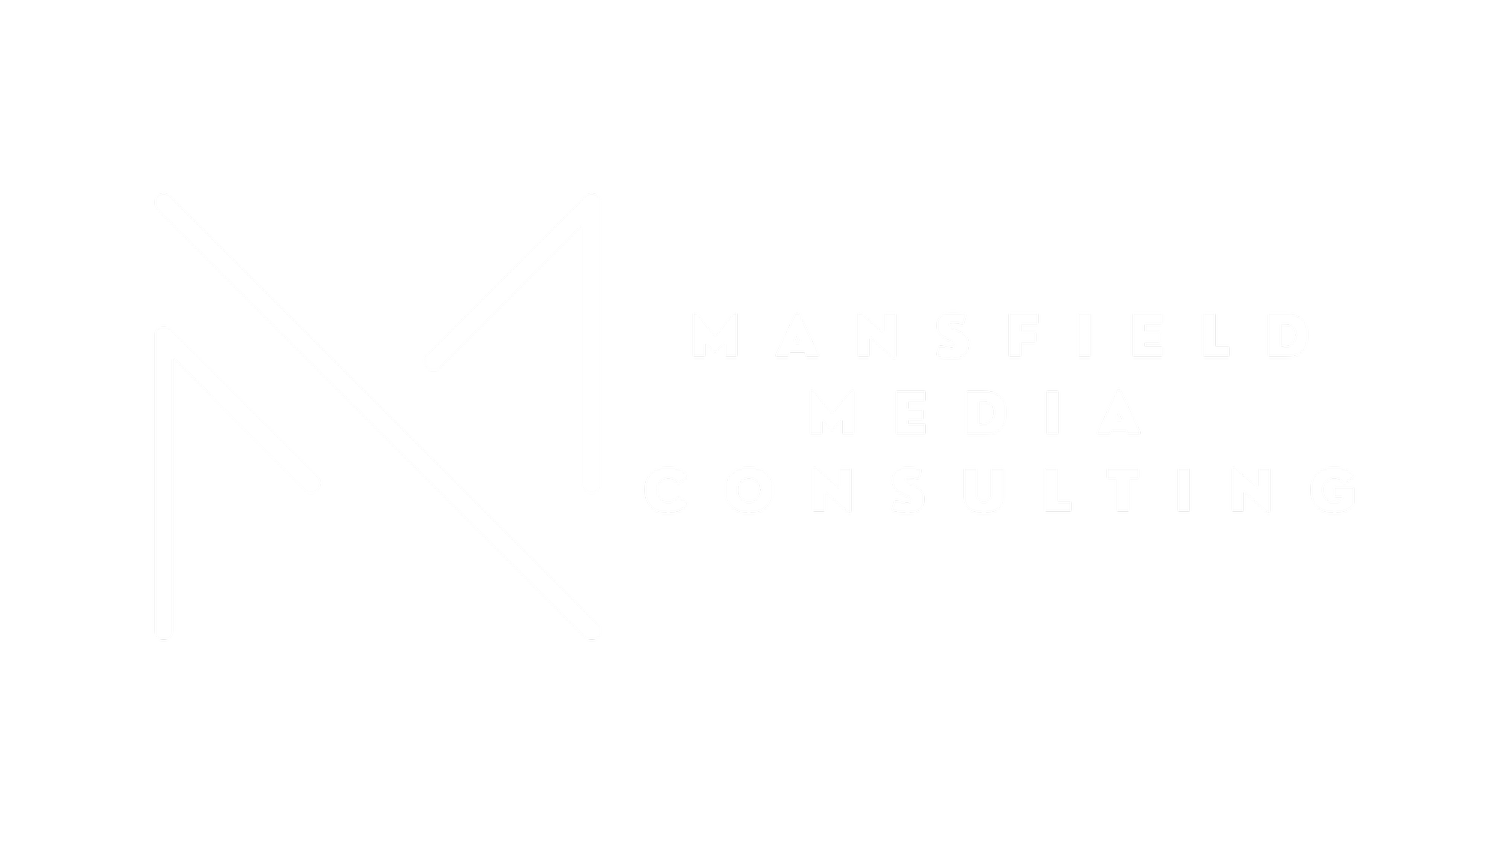 Mansfield Media Consulting